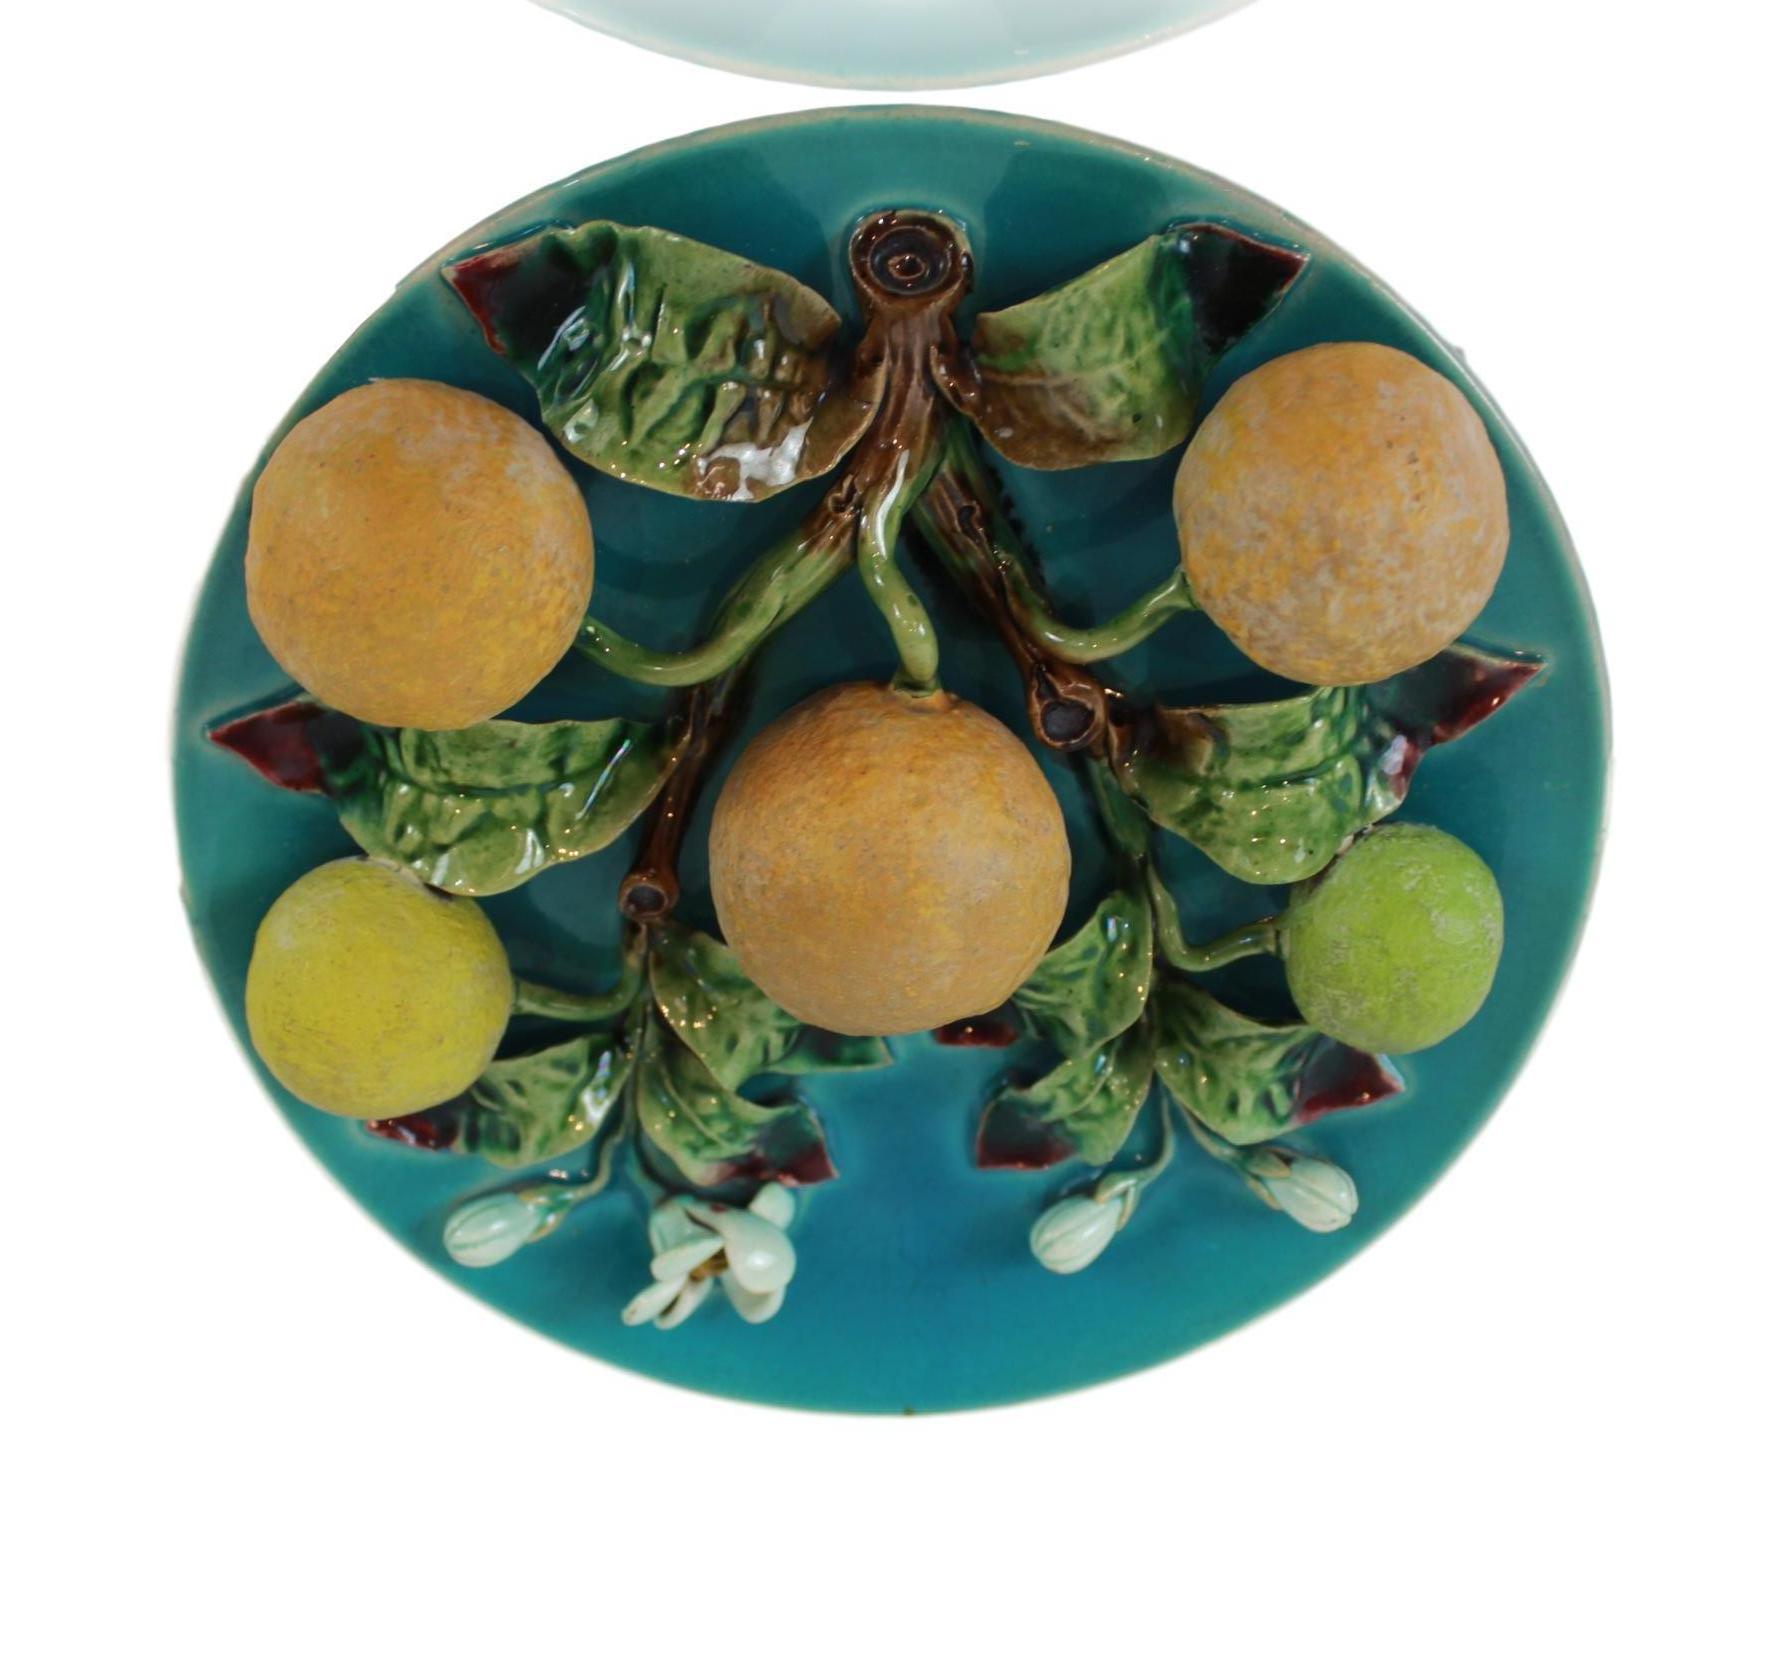 Menton French Majolica Barbotine wall plaque on a turquoise ground with oranges molded in high relief, circa 1880, diameter 8 inches.
Generally referred to as 